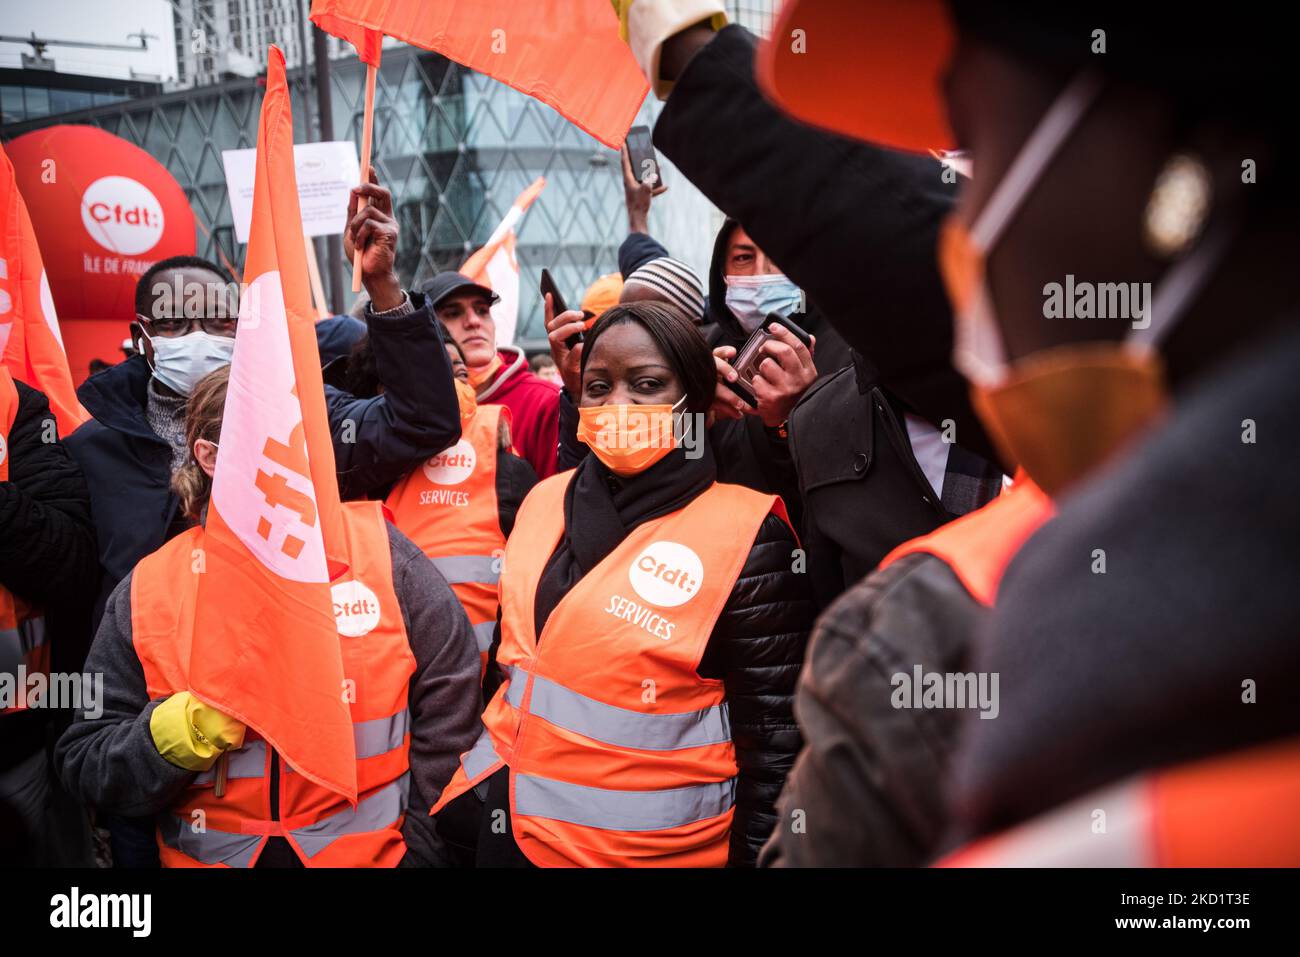 Several hundred activists from the CFDT (Confédération Française Des Travailleurs) union gathered in Paris in front of the Beaugrenelle shopping center on February 3, 2022 to participate in the March of Non-Essential Workers organized by the union to demand better wages and working conditions for those who were on the front lines during the COVID pandemic. (Photo by Samuel Boivin/NurPhoto) Stock Photo